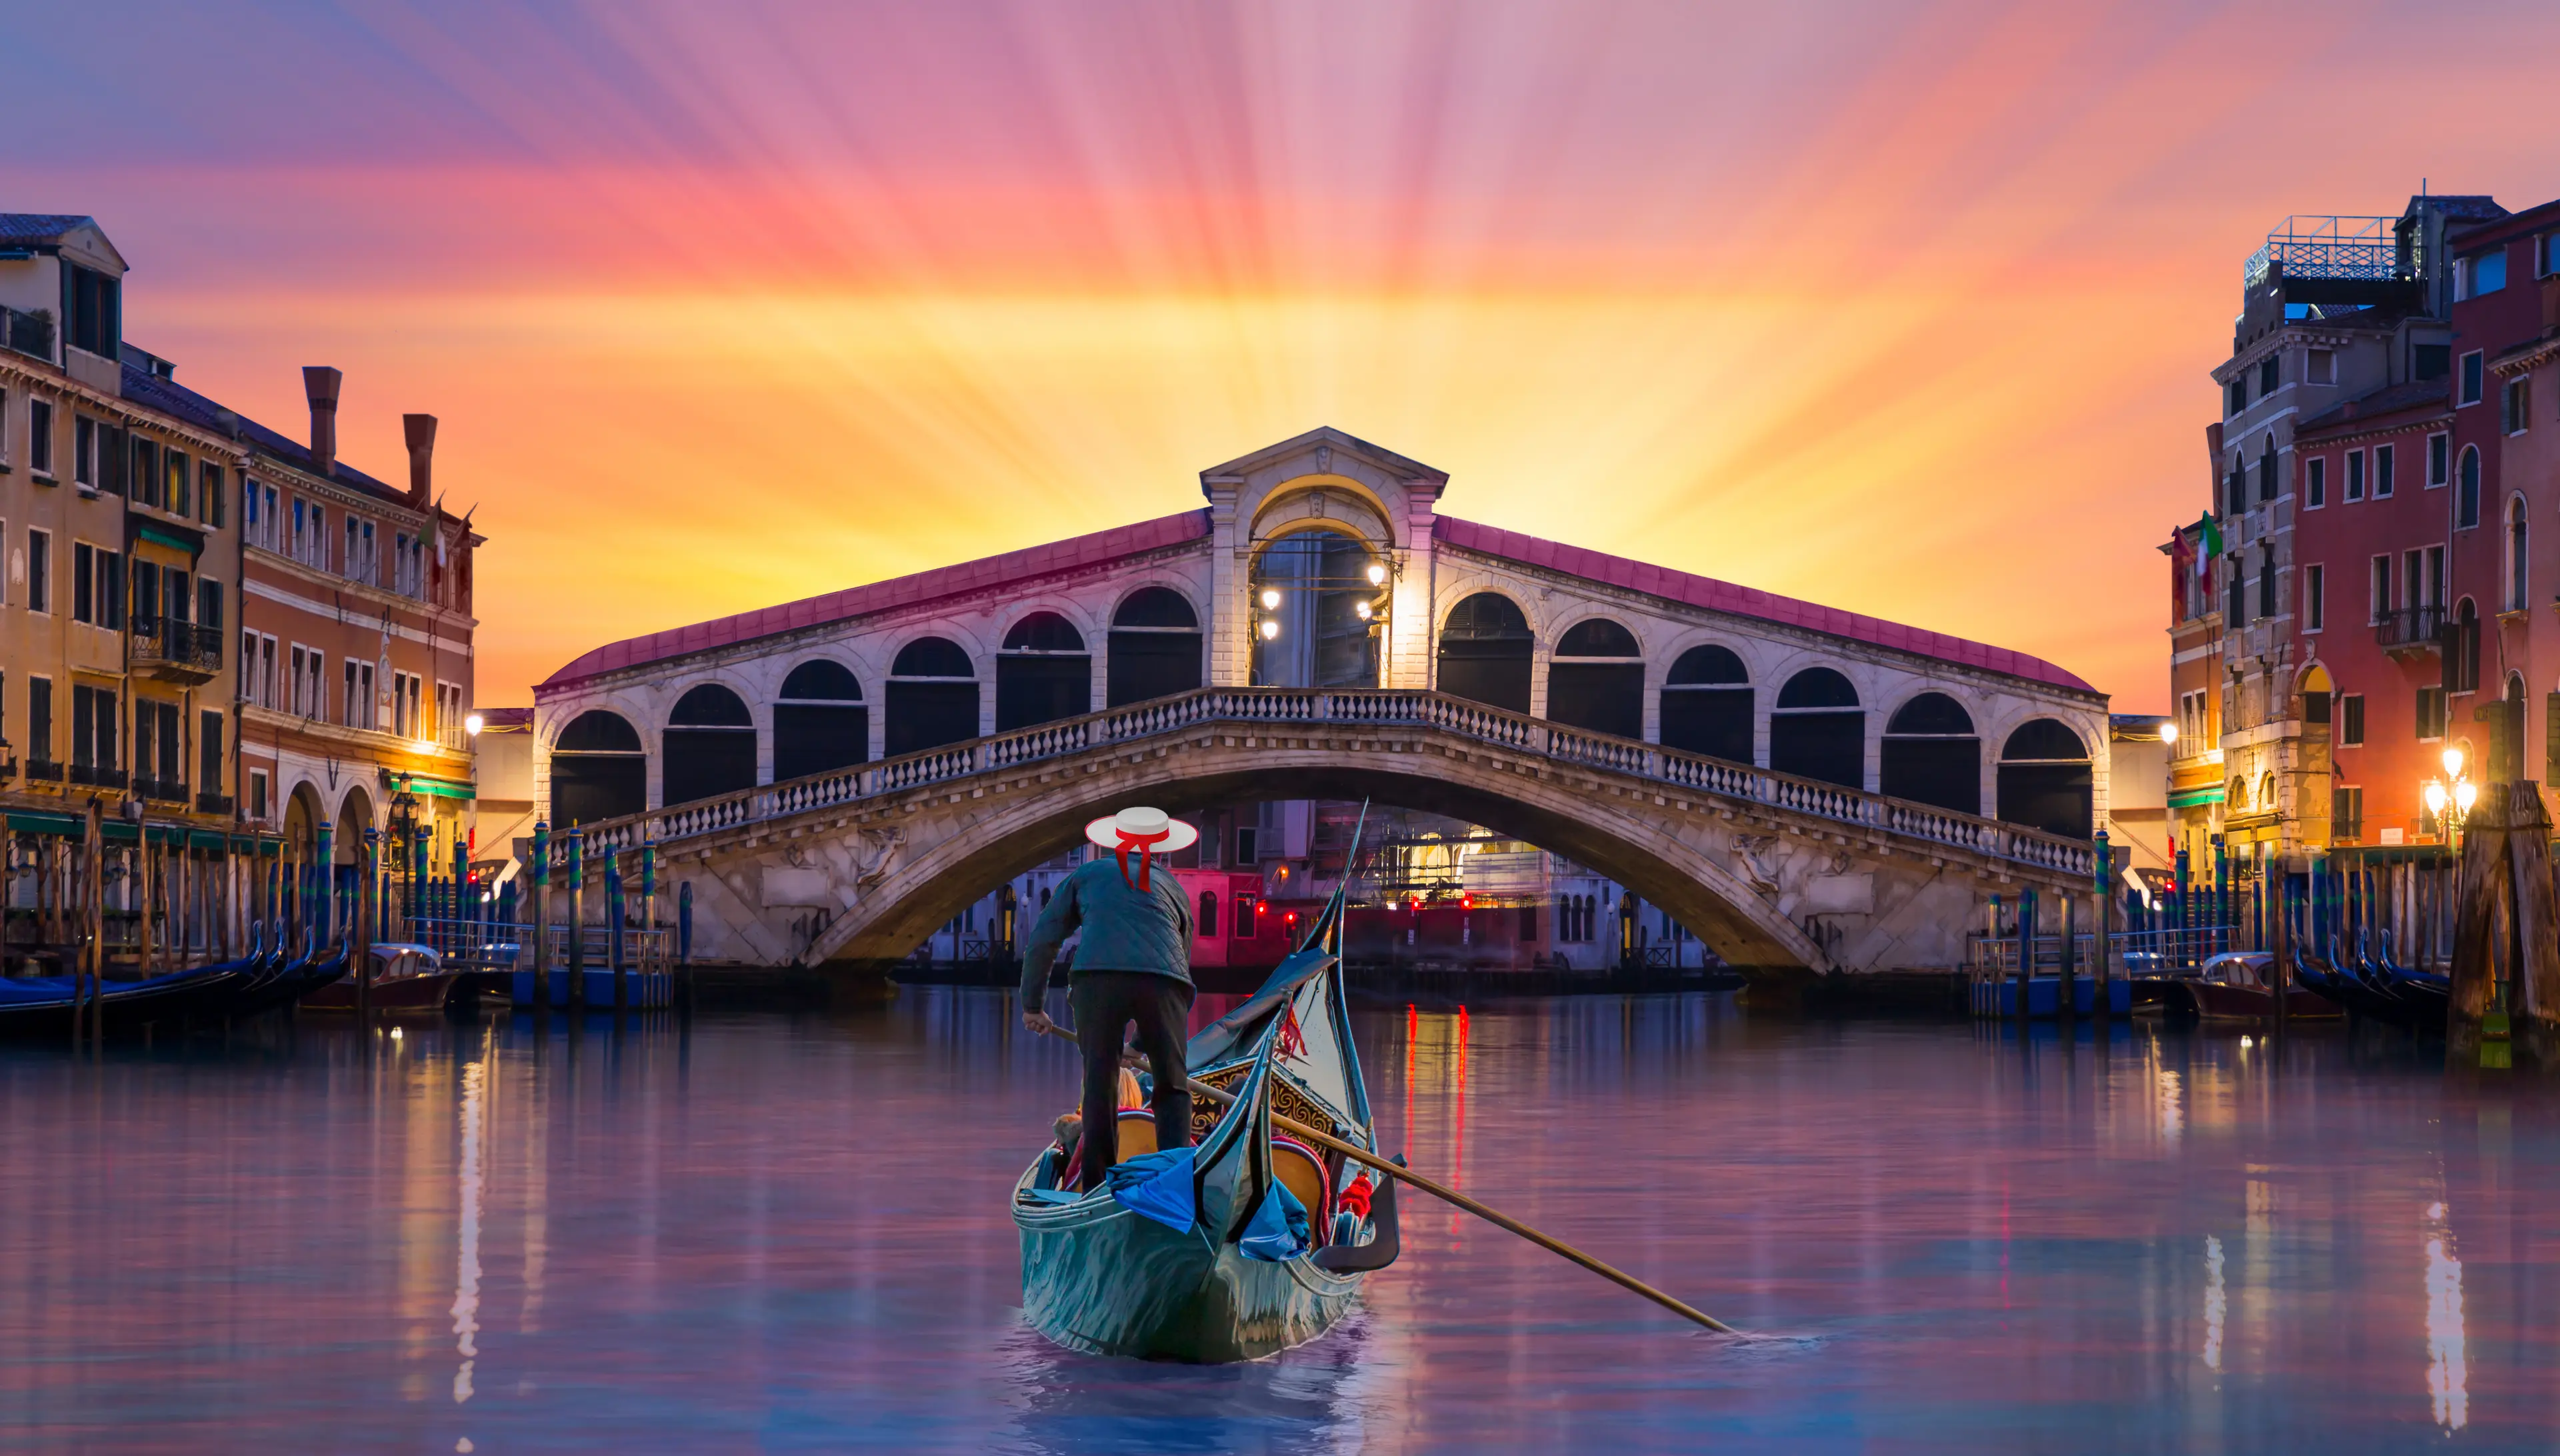 A gondolier approaching the Rialto bridge during sunset